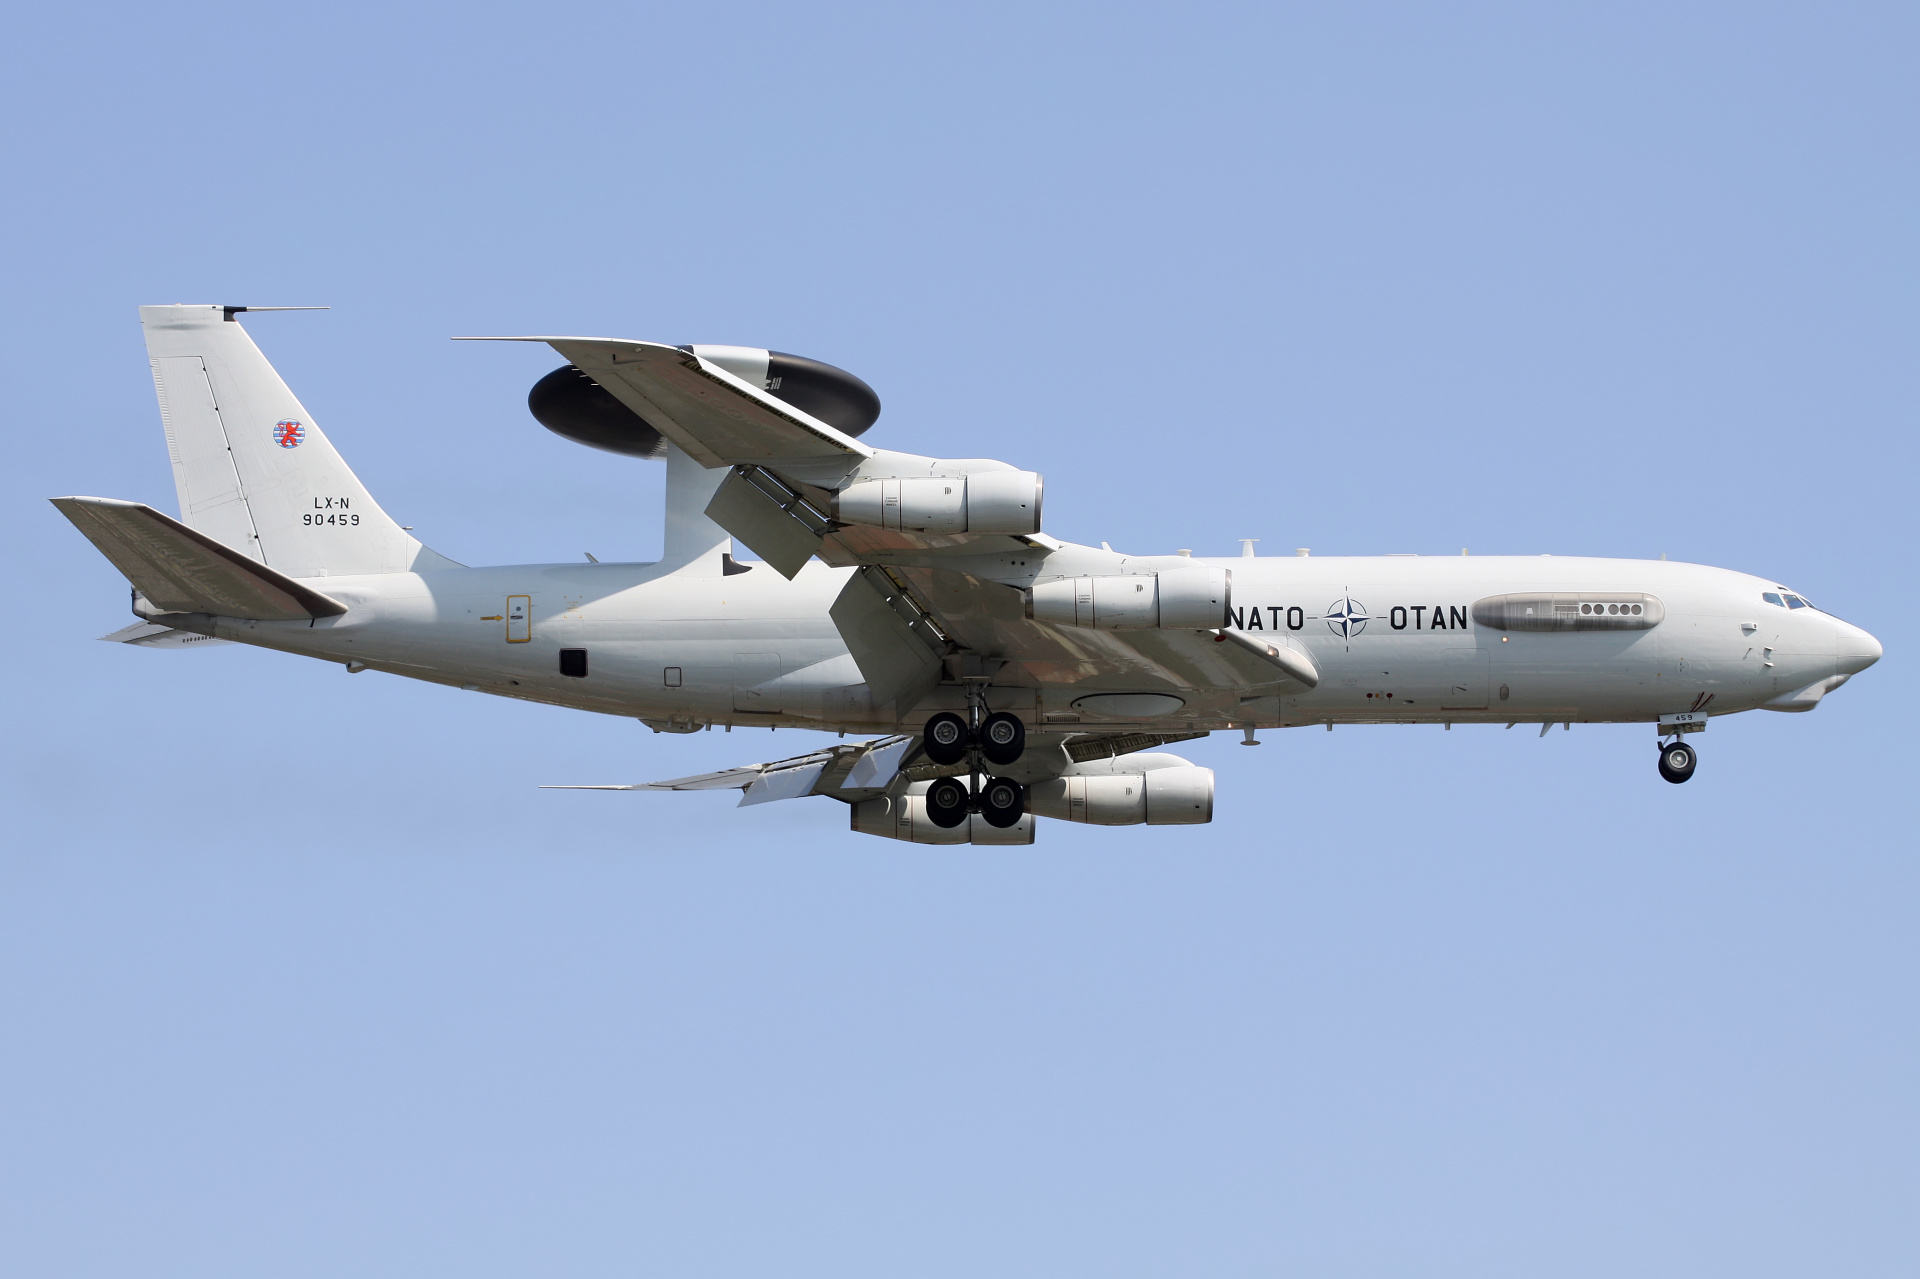 Boeing E-3A Sentry, LX-N 90459, NATO Airborne Early Warning Force (Aircraft » Dęblin)